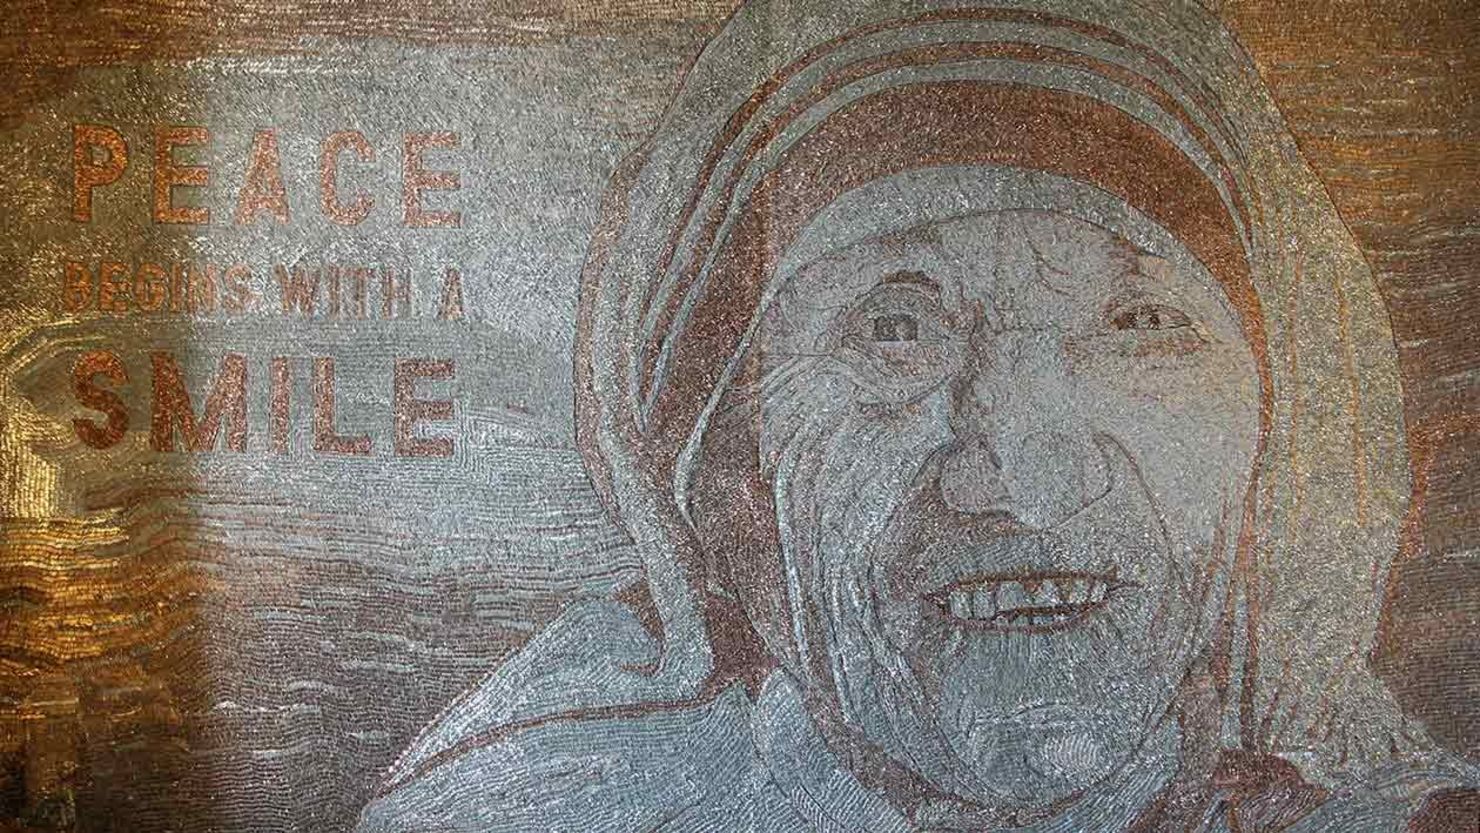 Artist Saimir Strati was inspired by the refugee crisis to create Mother Teresa's smiling portrait.